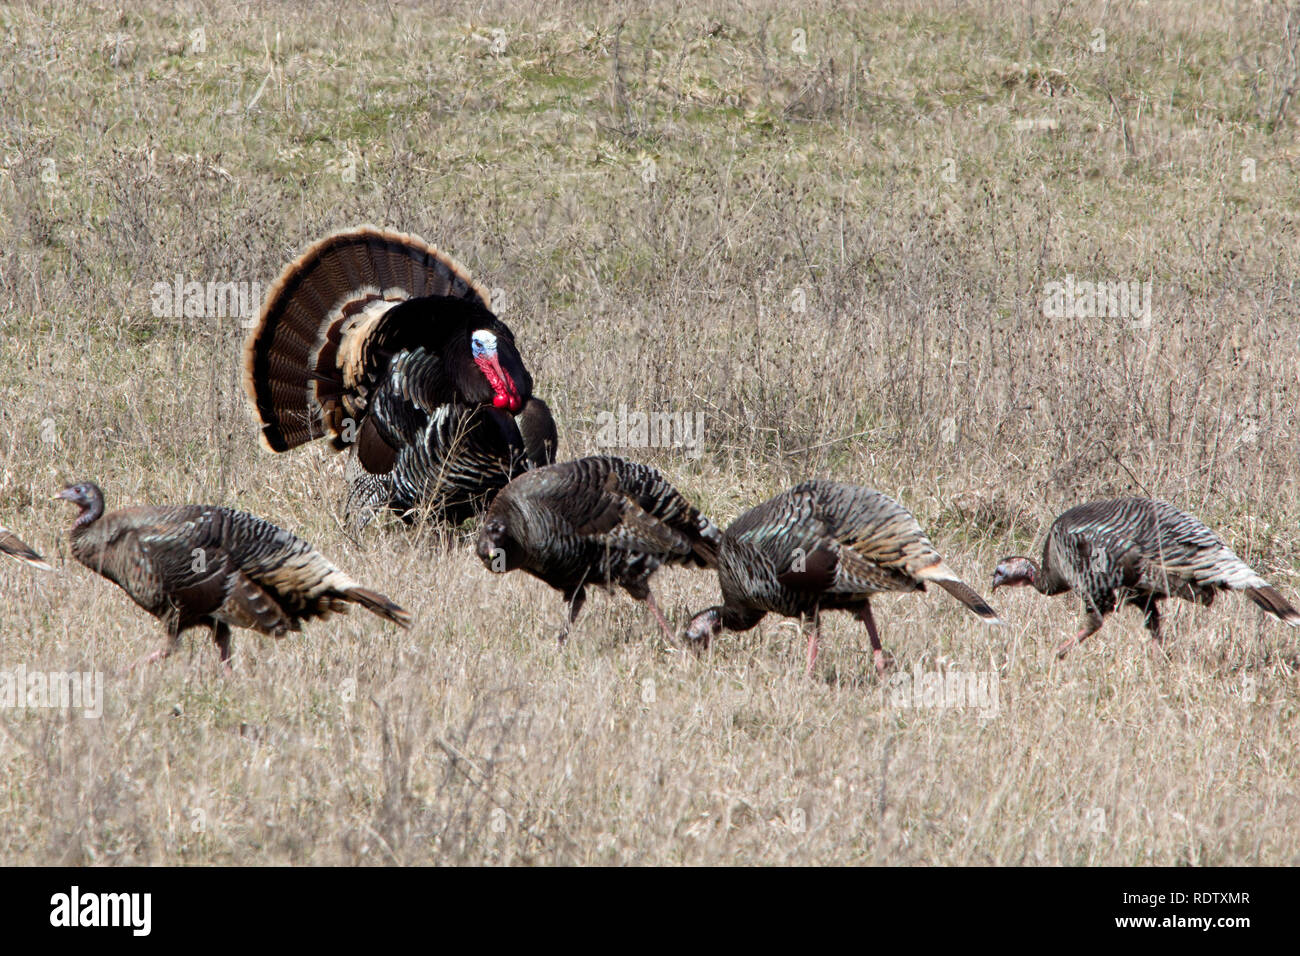 A wild Tom turkey displays in front of his hens Stock Photo